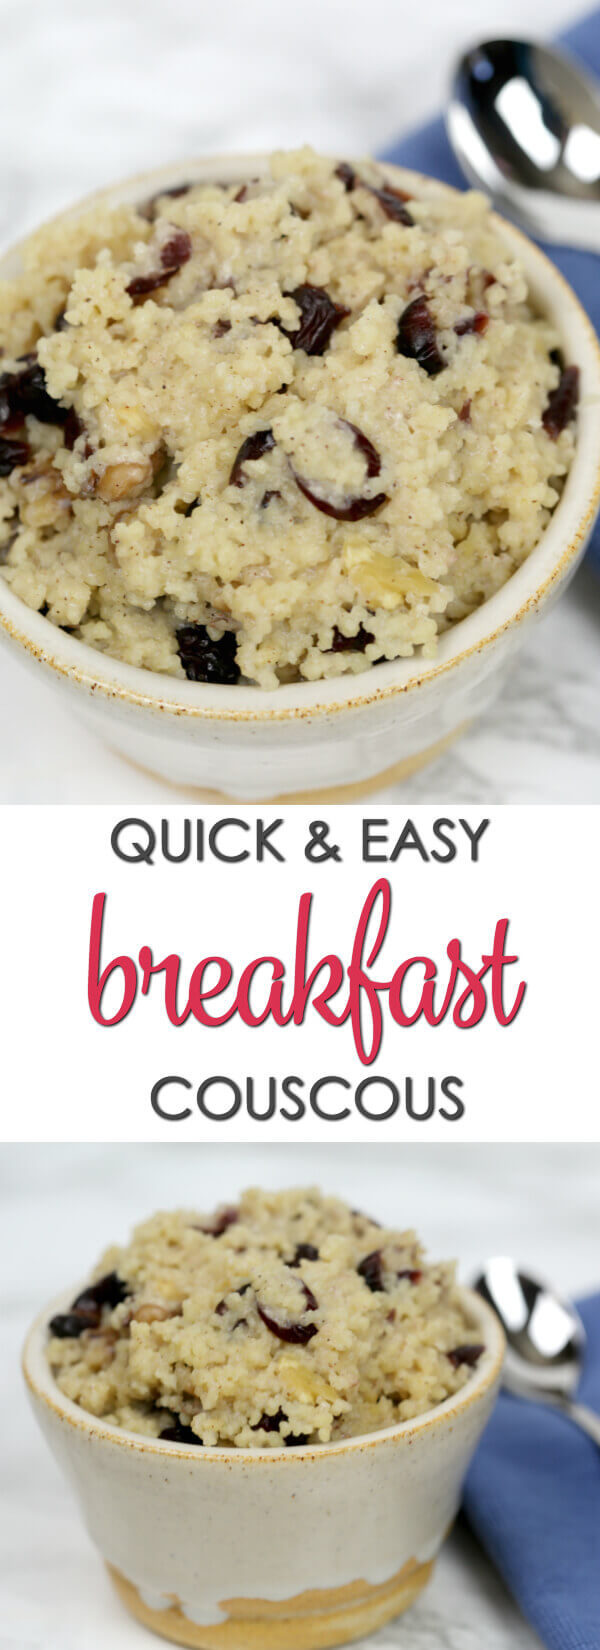 Breakfast Couscous - this quick and easy breakfast recipe is warm, hearty and filling